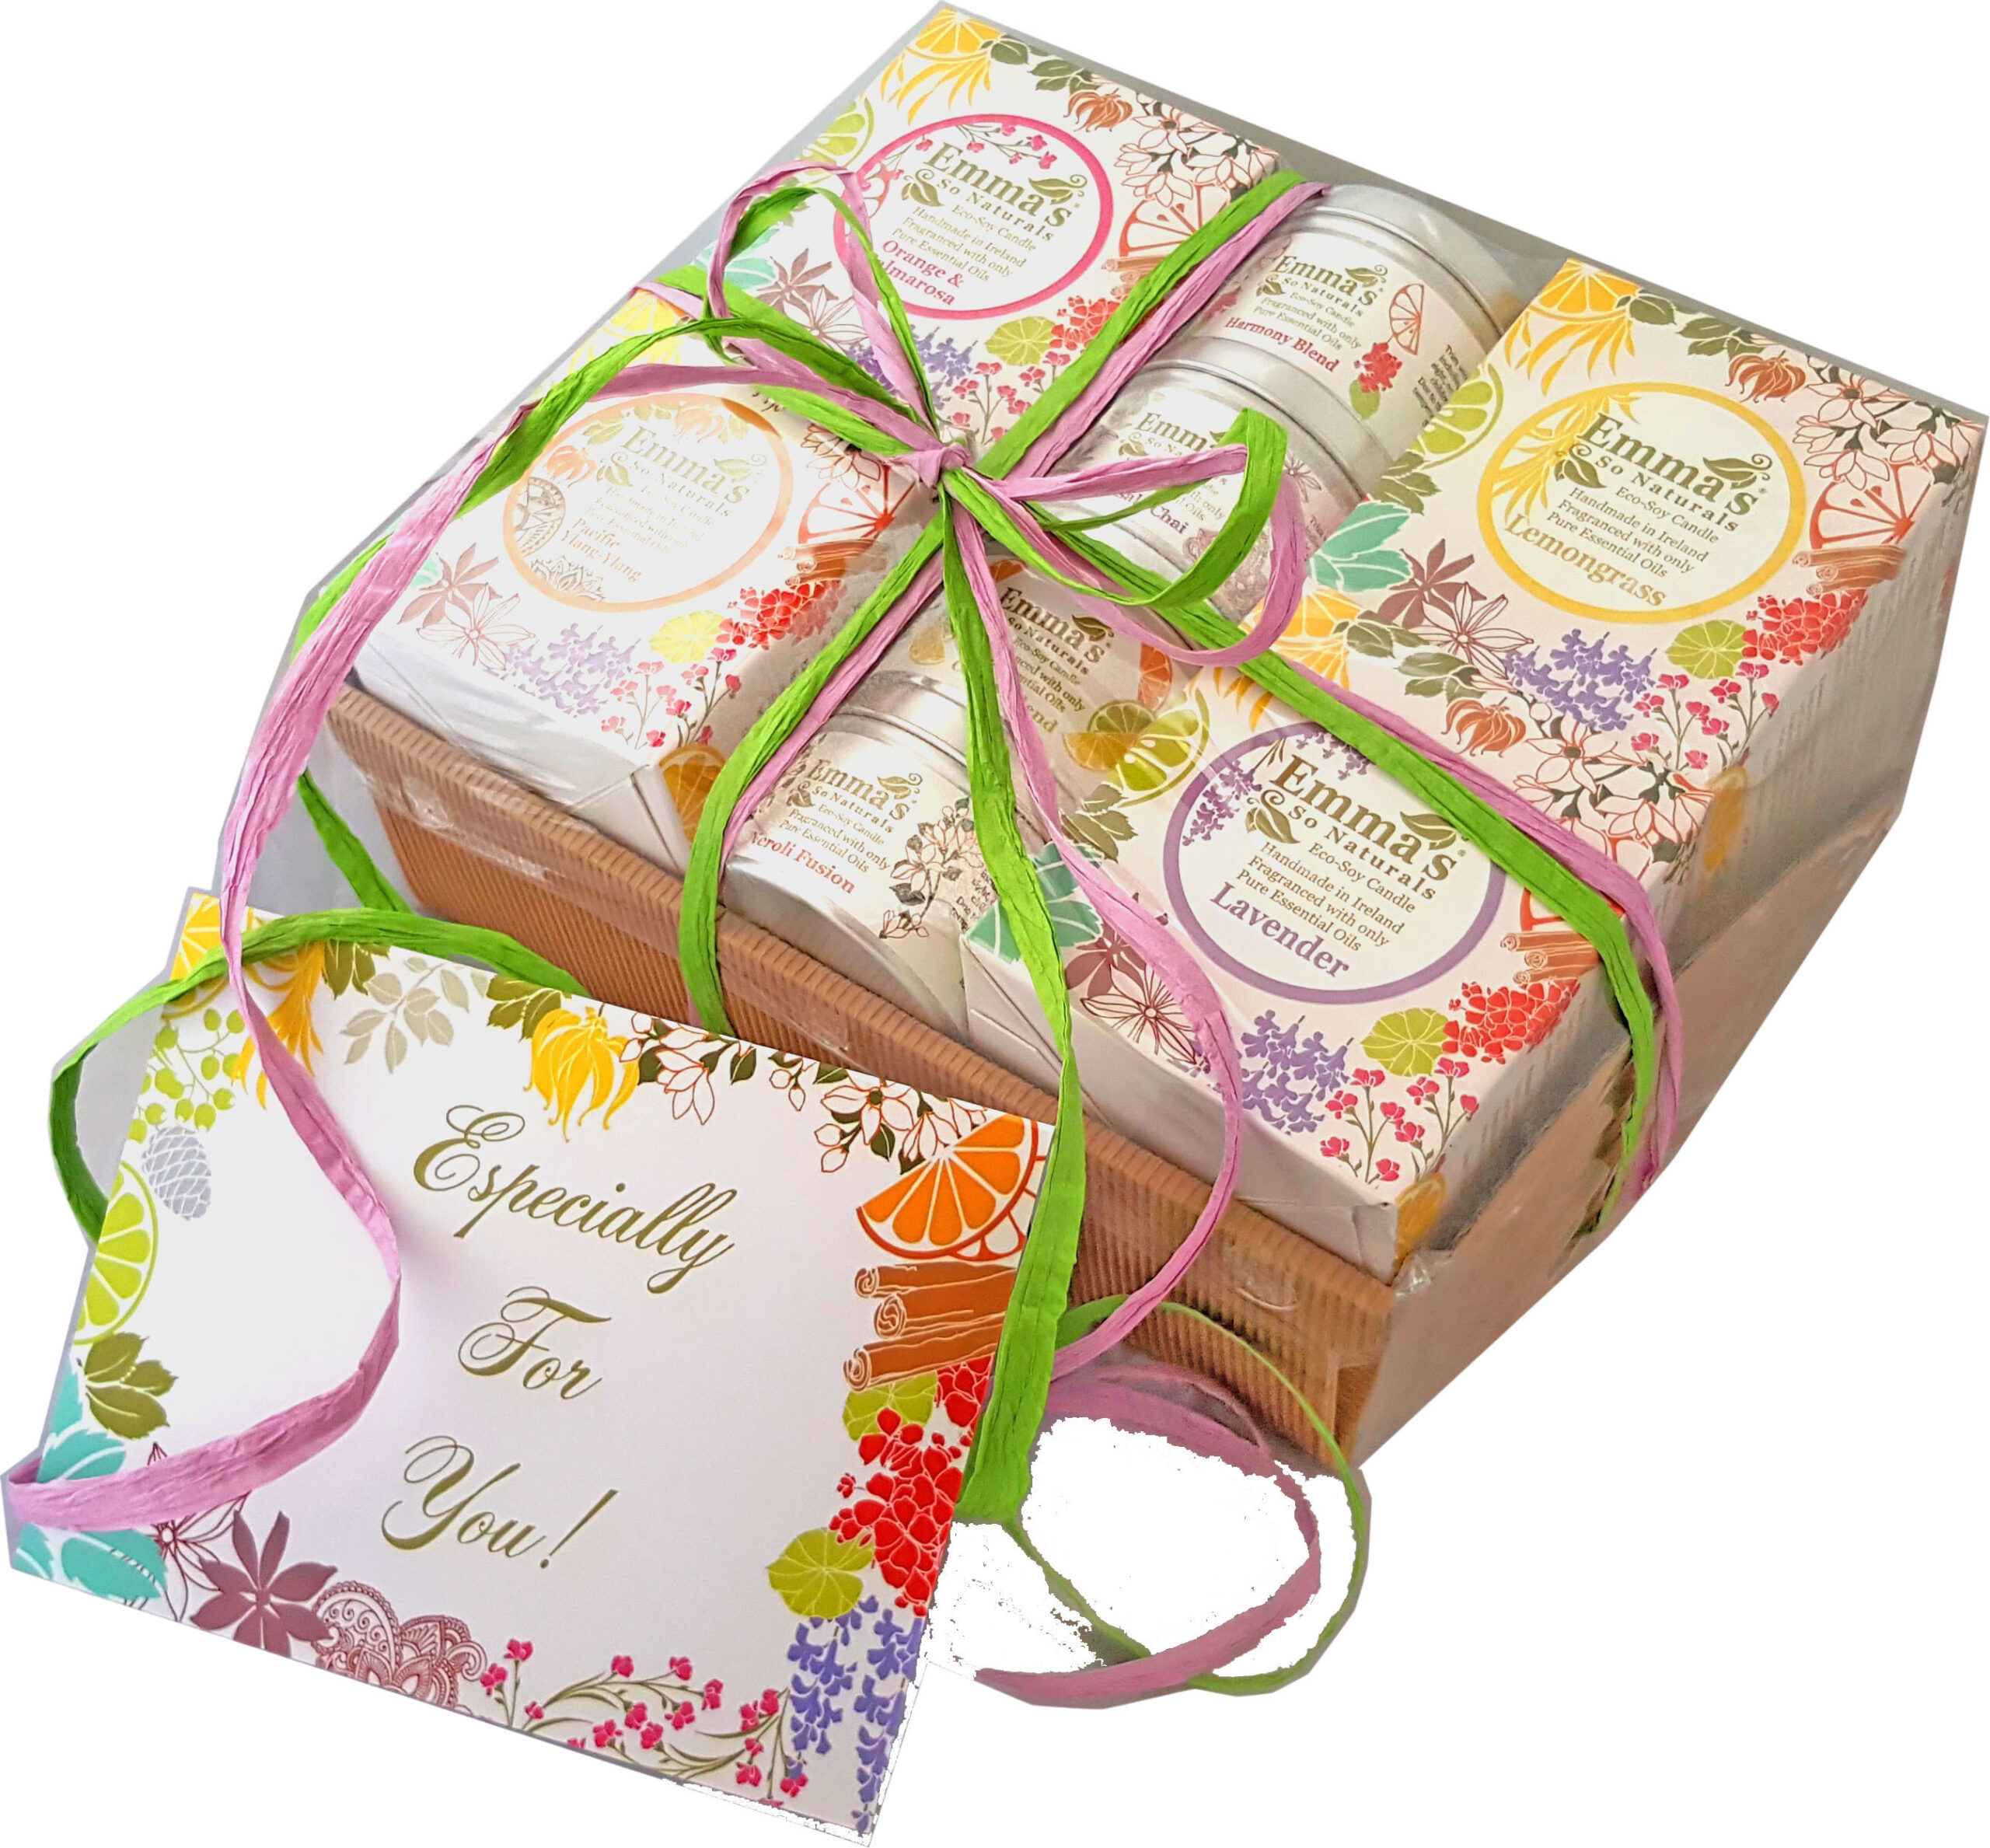 Emma's So Naturals Gift Wrapped Hamper & Greeting Card